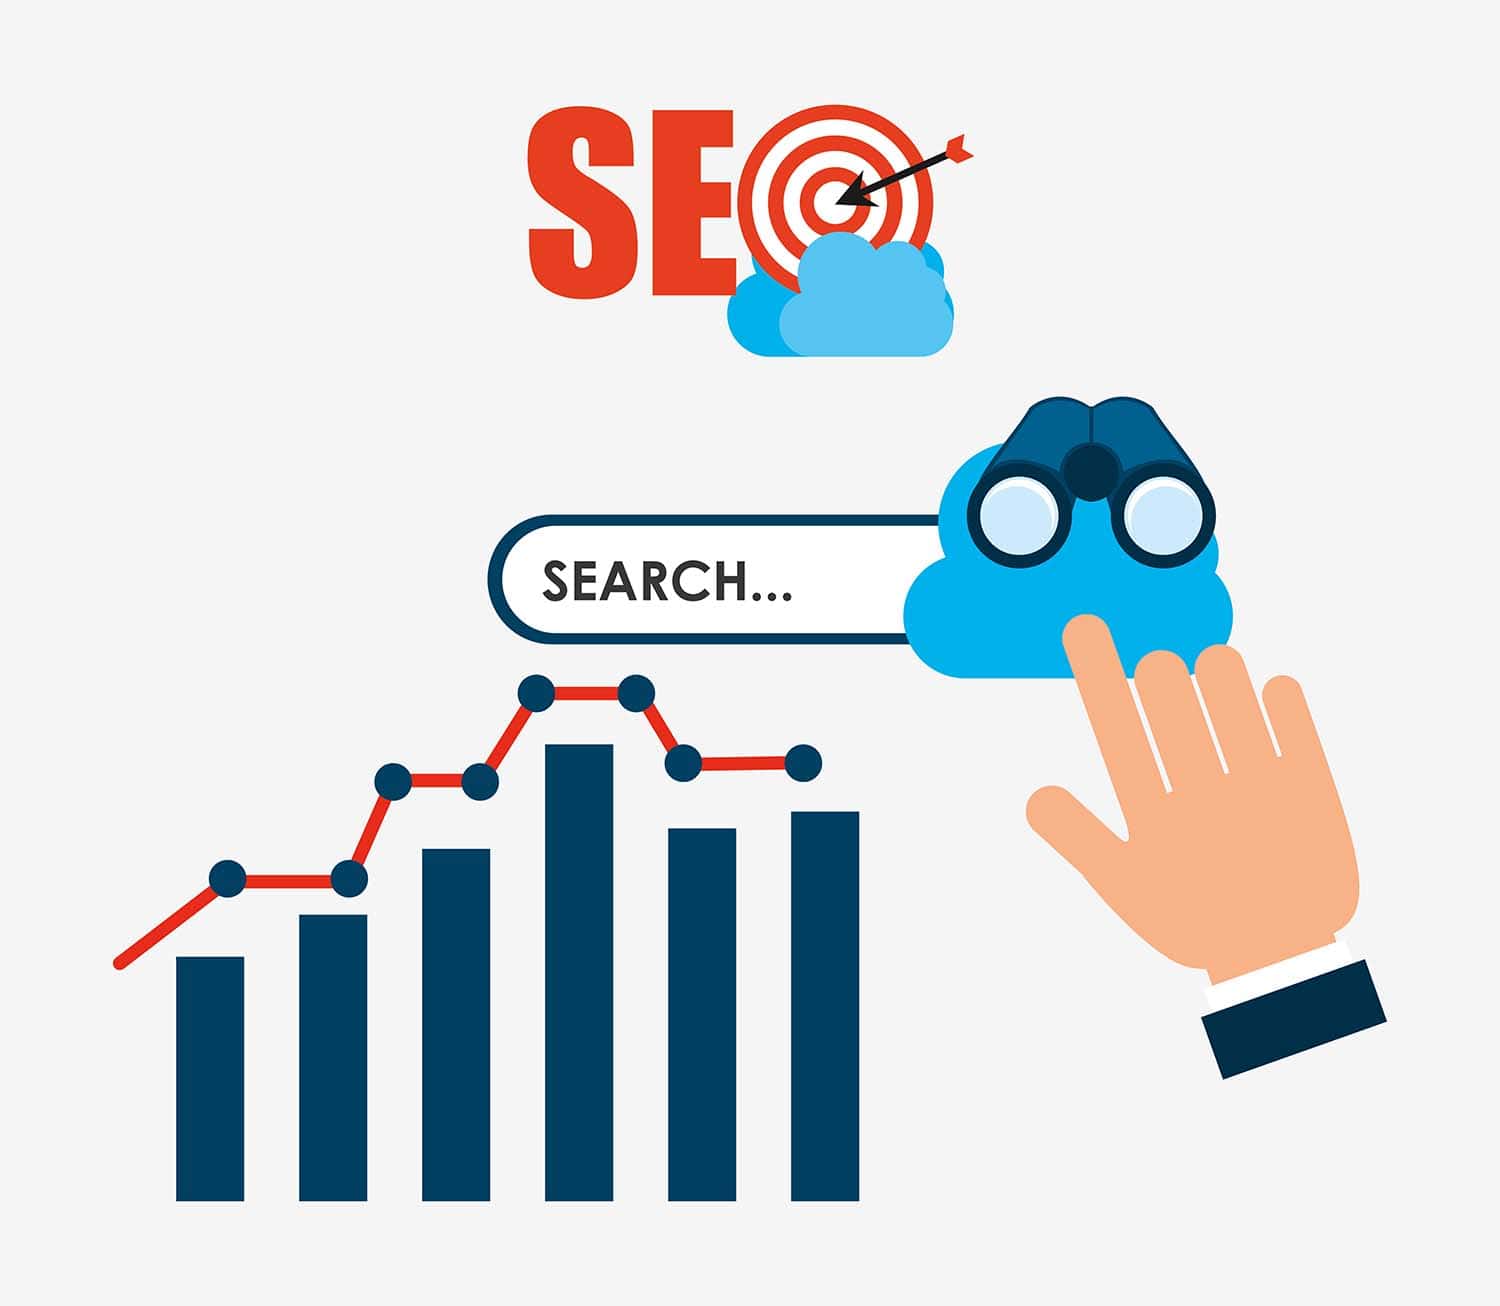 SEO for Local Business